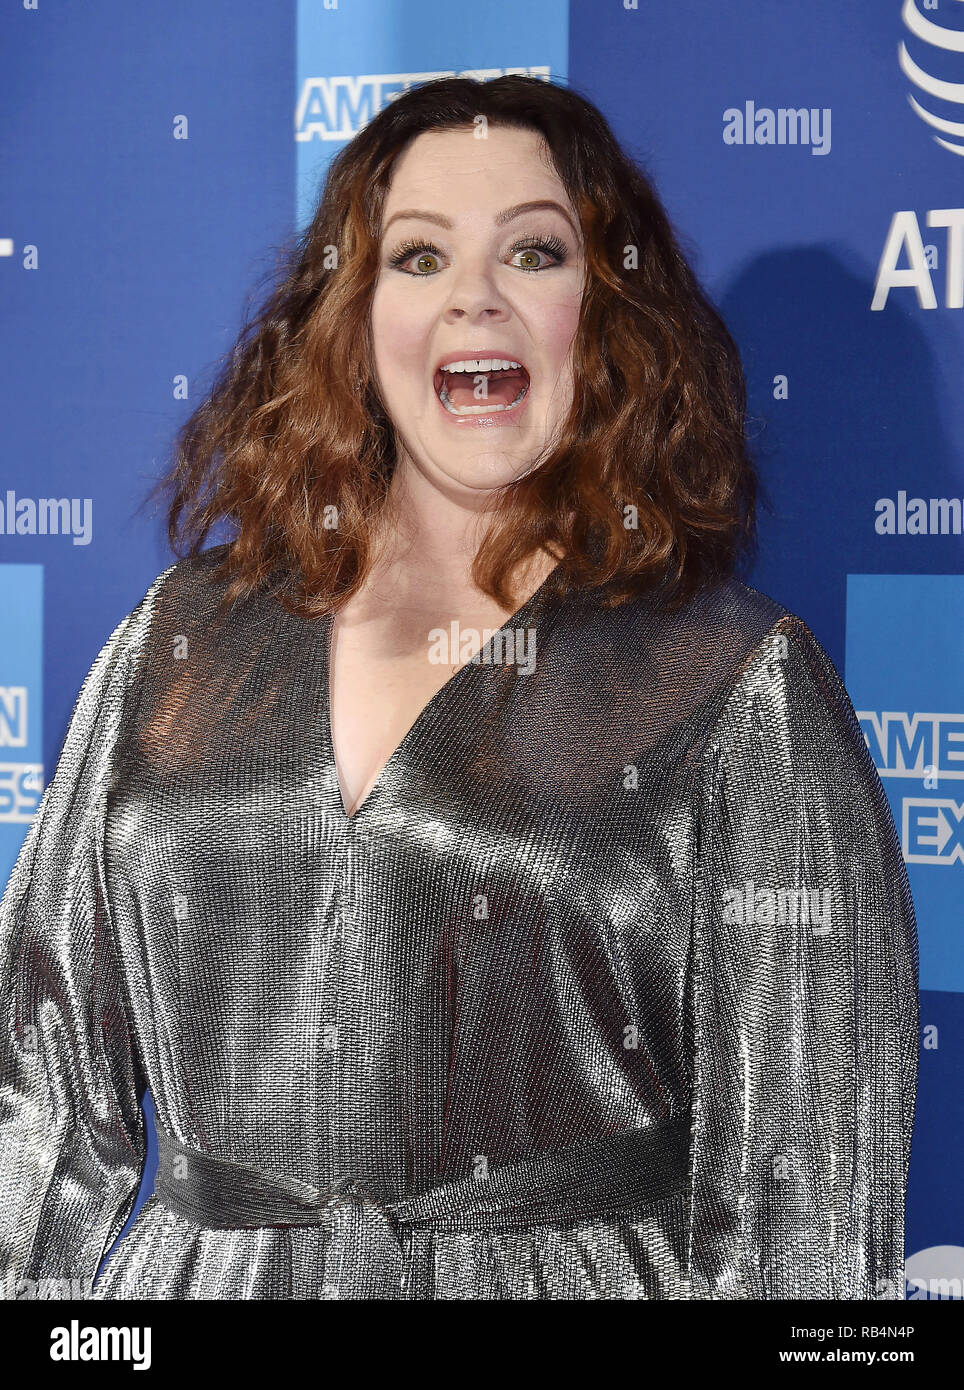 MELISSA McCARTHY American film actress at  the 30th Annual Palm Springs International Film Festival Film Awards Gala at Palm Springs Convention Center on January 3, 2019 in Palm Springs, California. Photo: Jeffrey Mayer Stock Photo